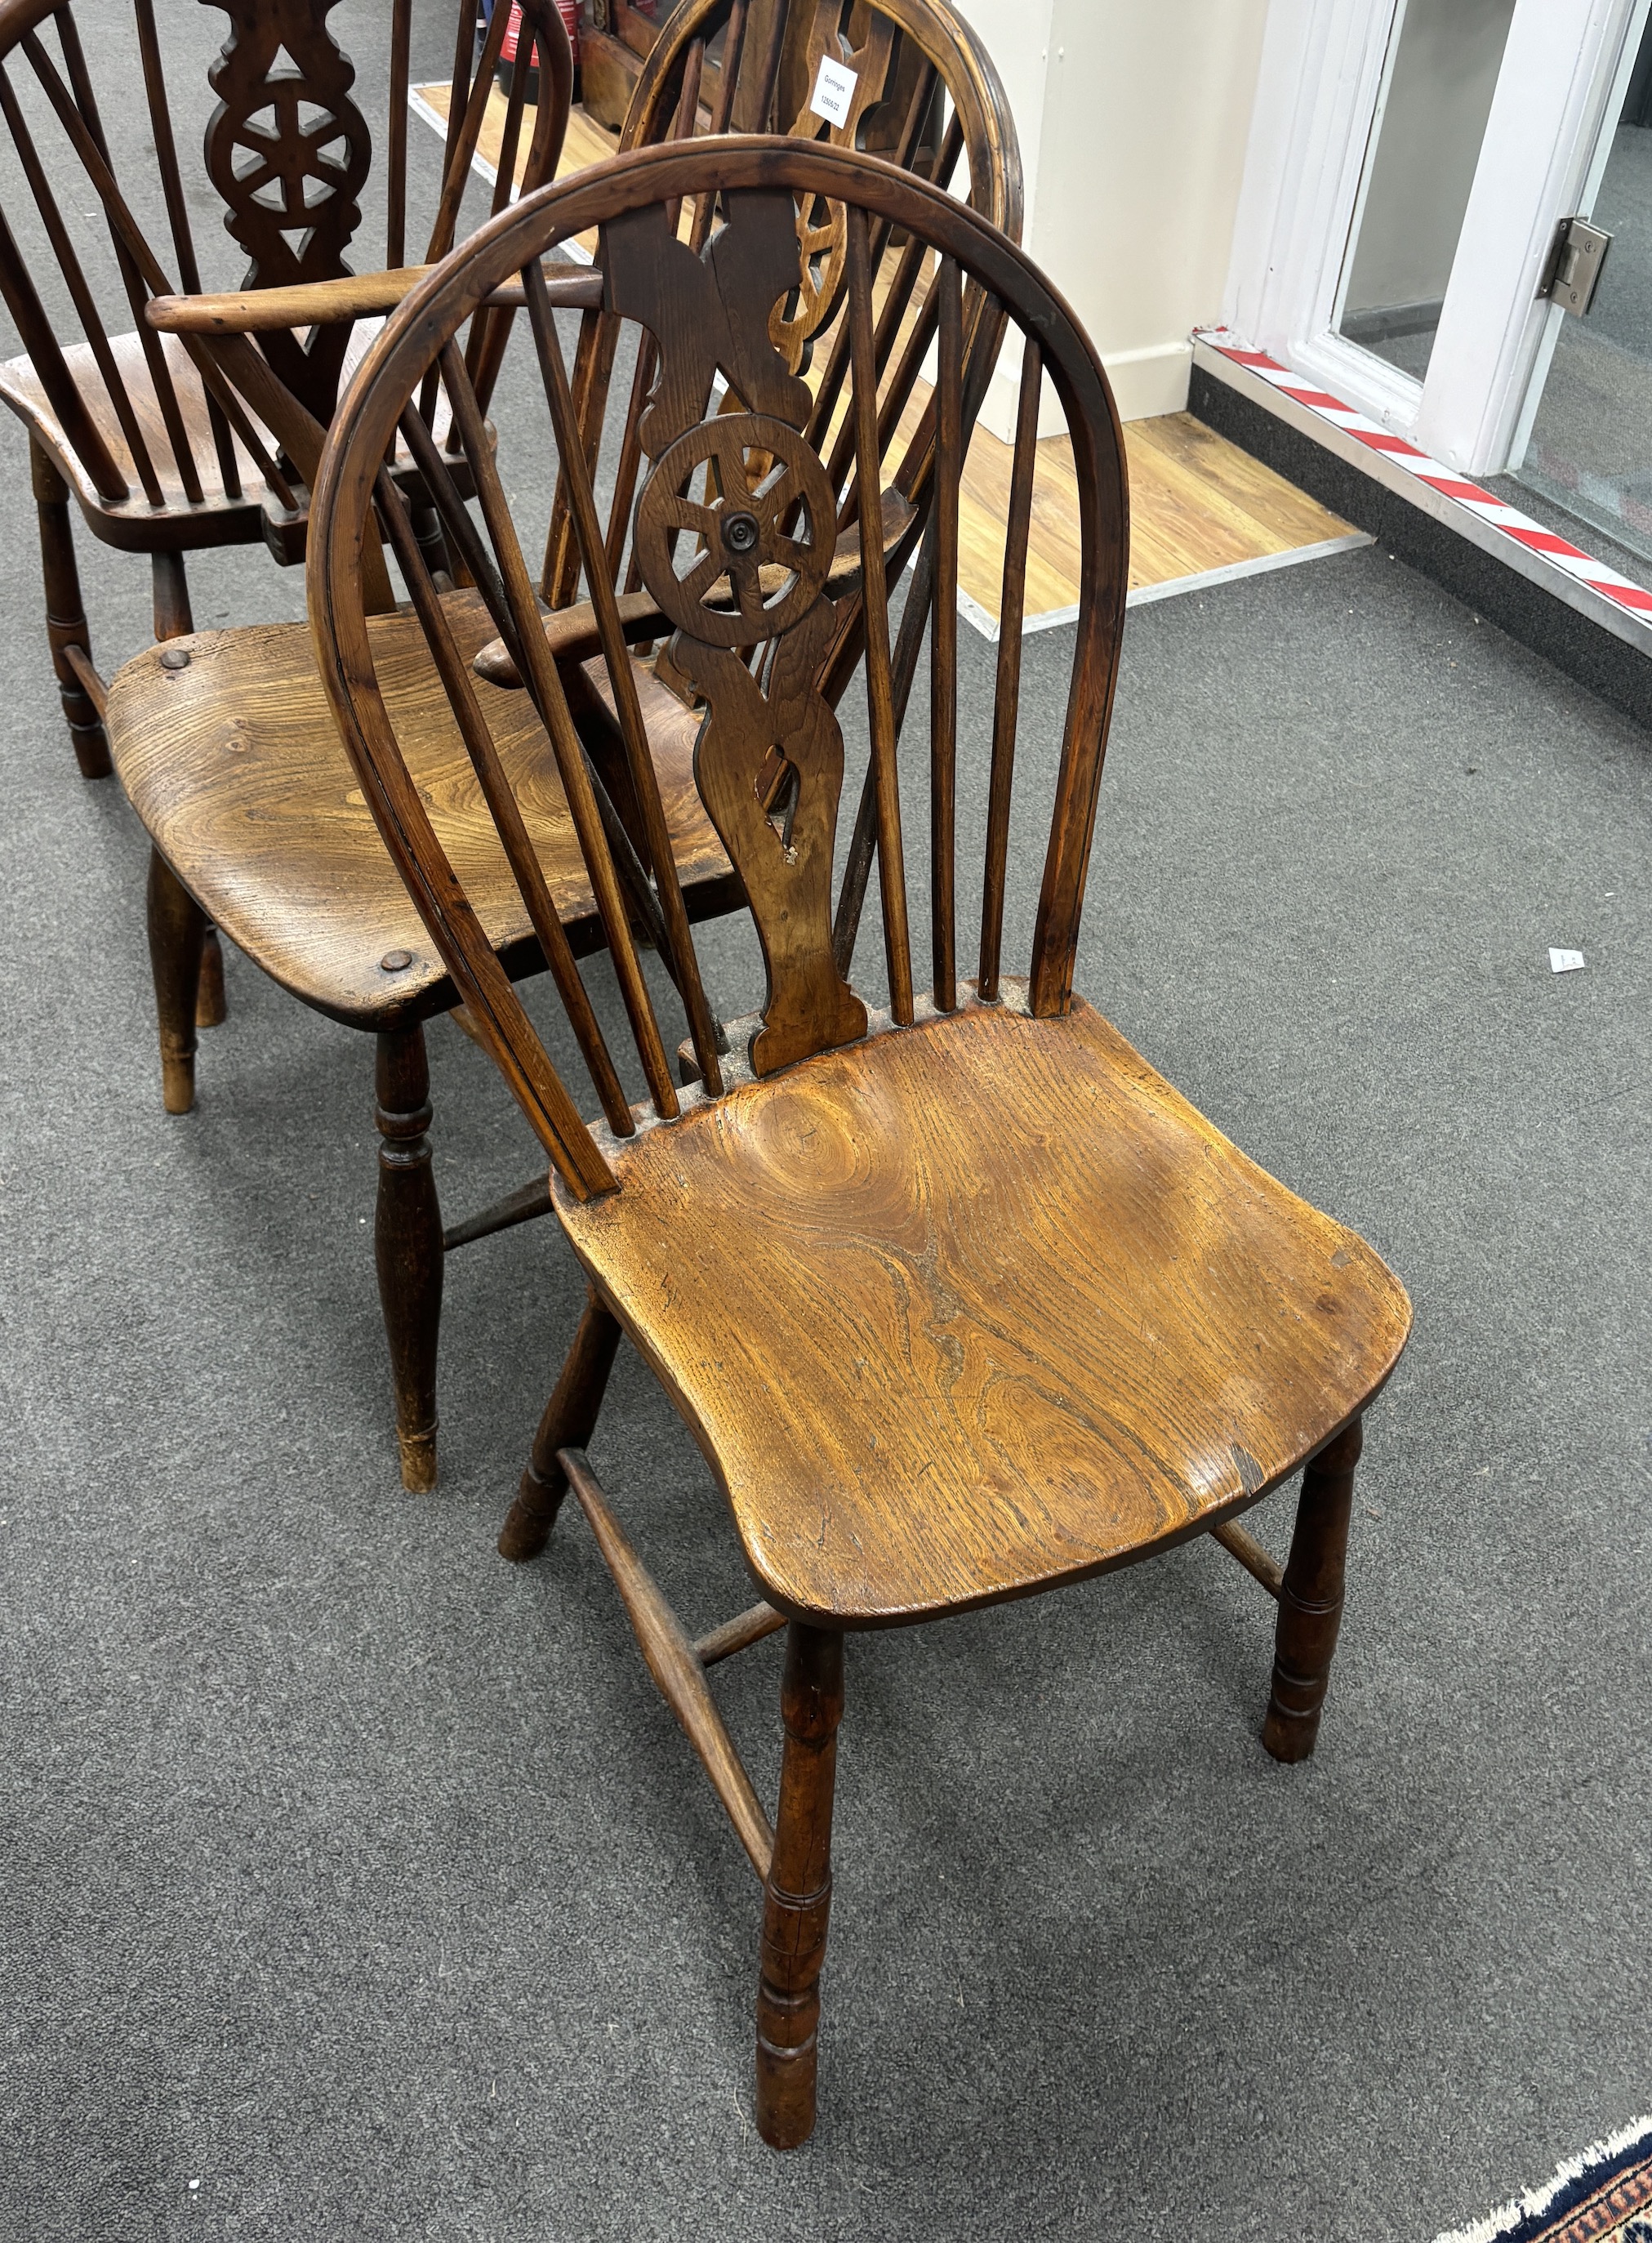 A set of three mid 19th century elm and ash wheel back dining chairs, one with arms